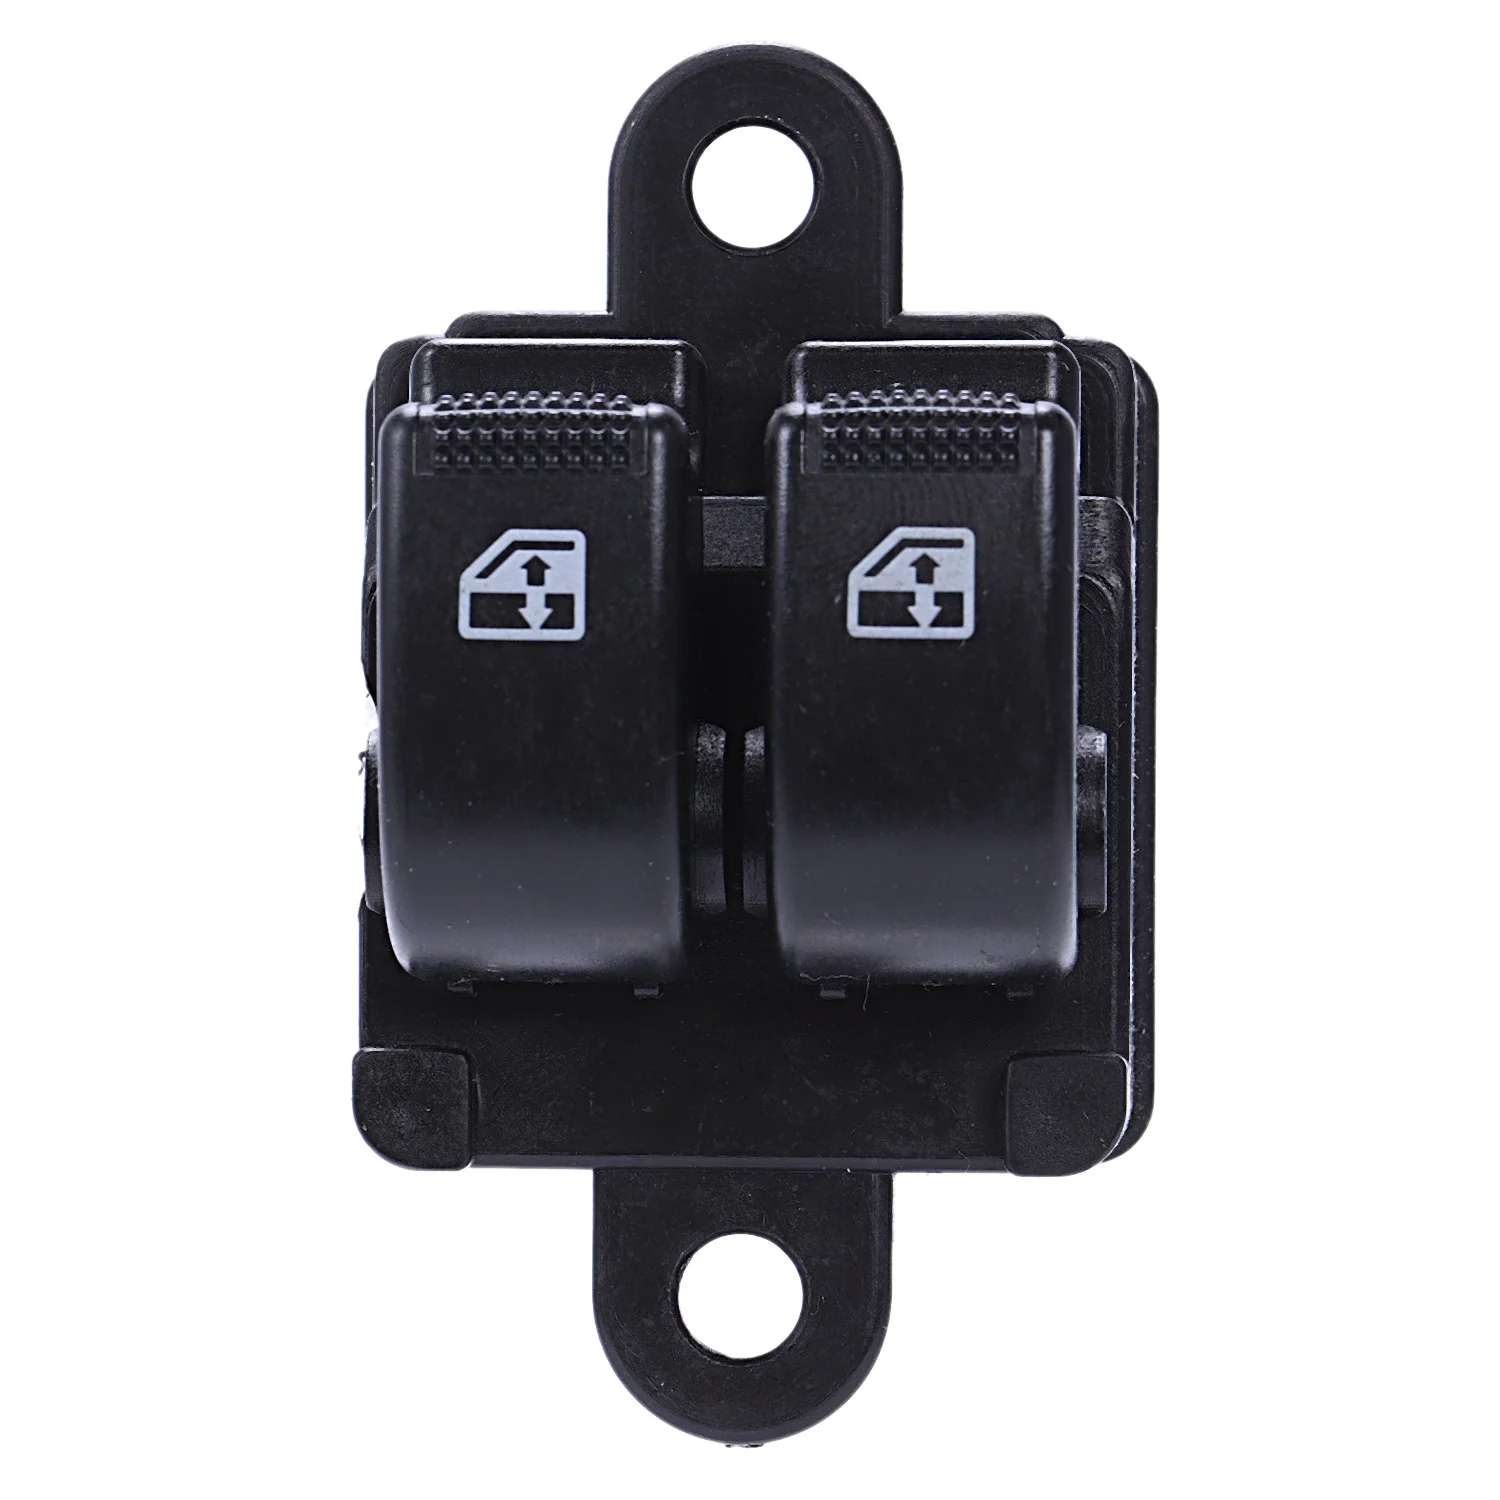 

New Electric Window Control Switch For Hyundai Amica Mix Hatchback Atos 93570-05050 9357005050